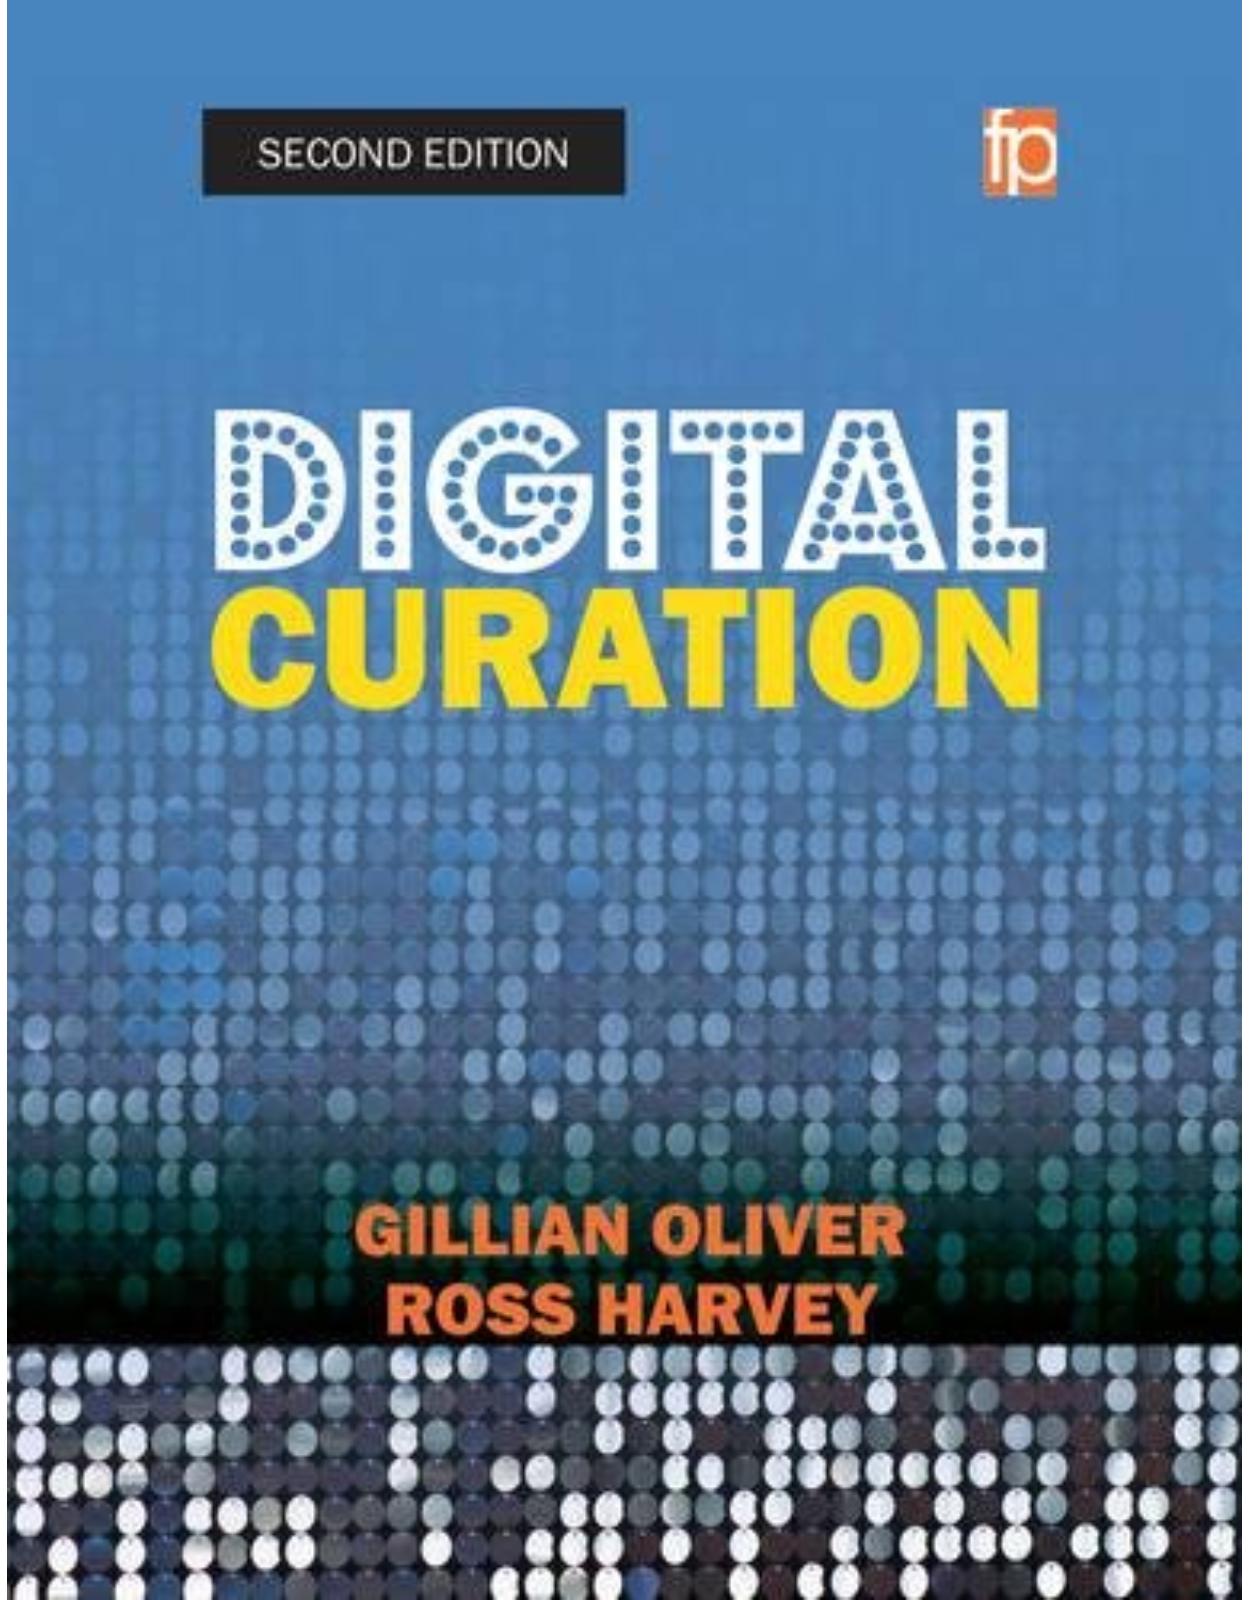 The Facet Preservation Collection 2: Digital Curation